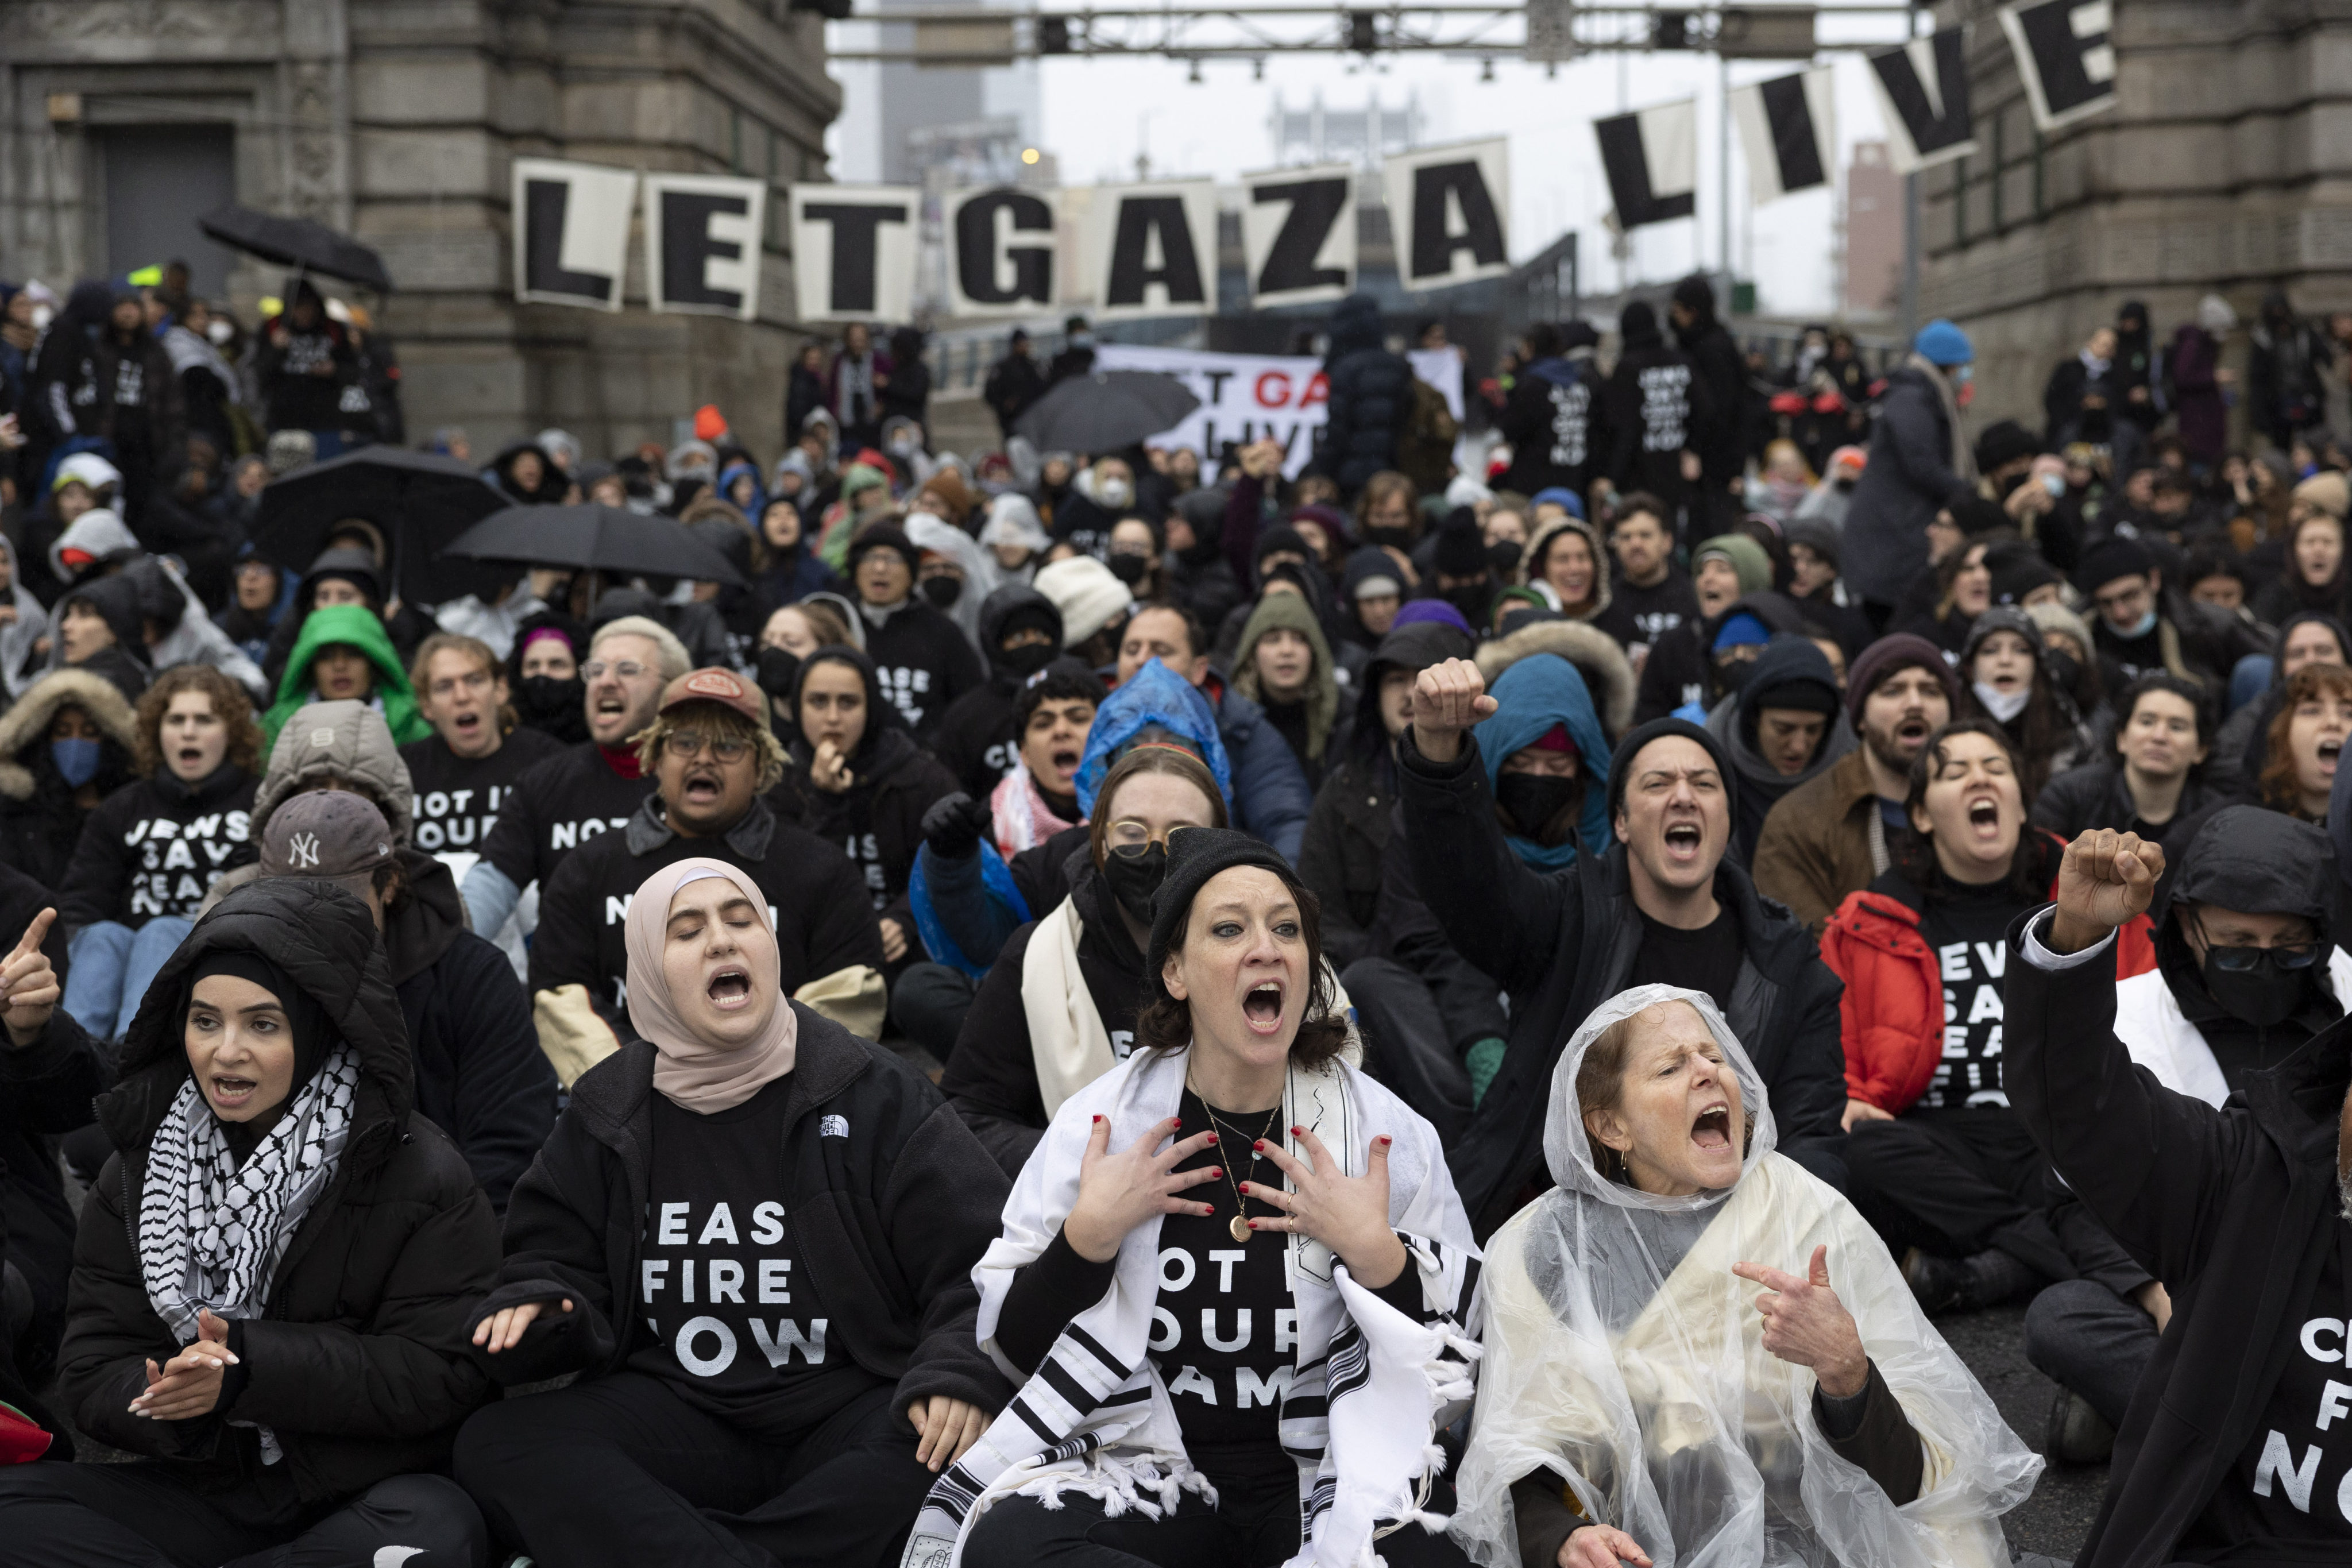 More than 1,000 protesters belonging to Jewish Voice For Peace blockade the Manhattan Bridge in New York and call for a permanent ceasefire in Gaza, on November 26. Photo: dpa